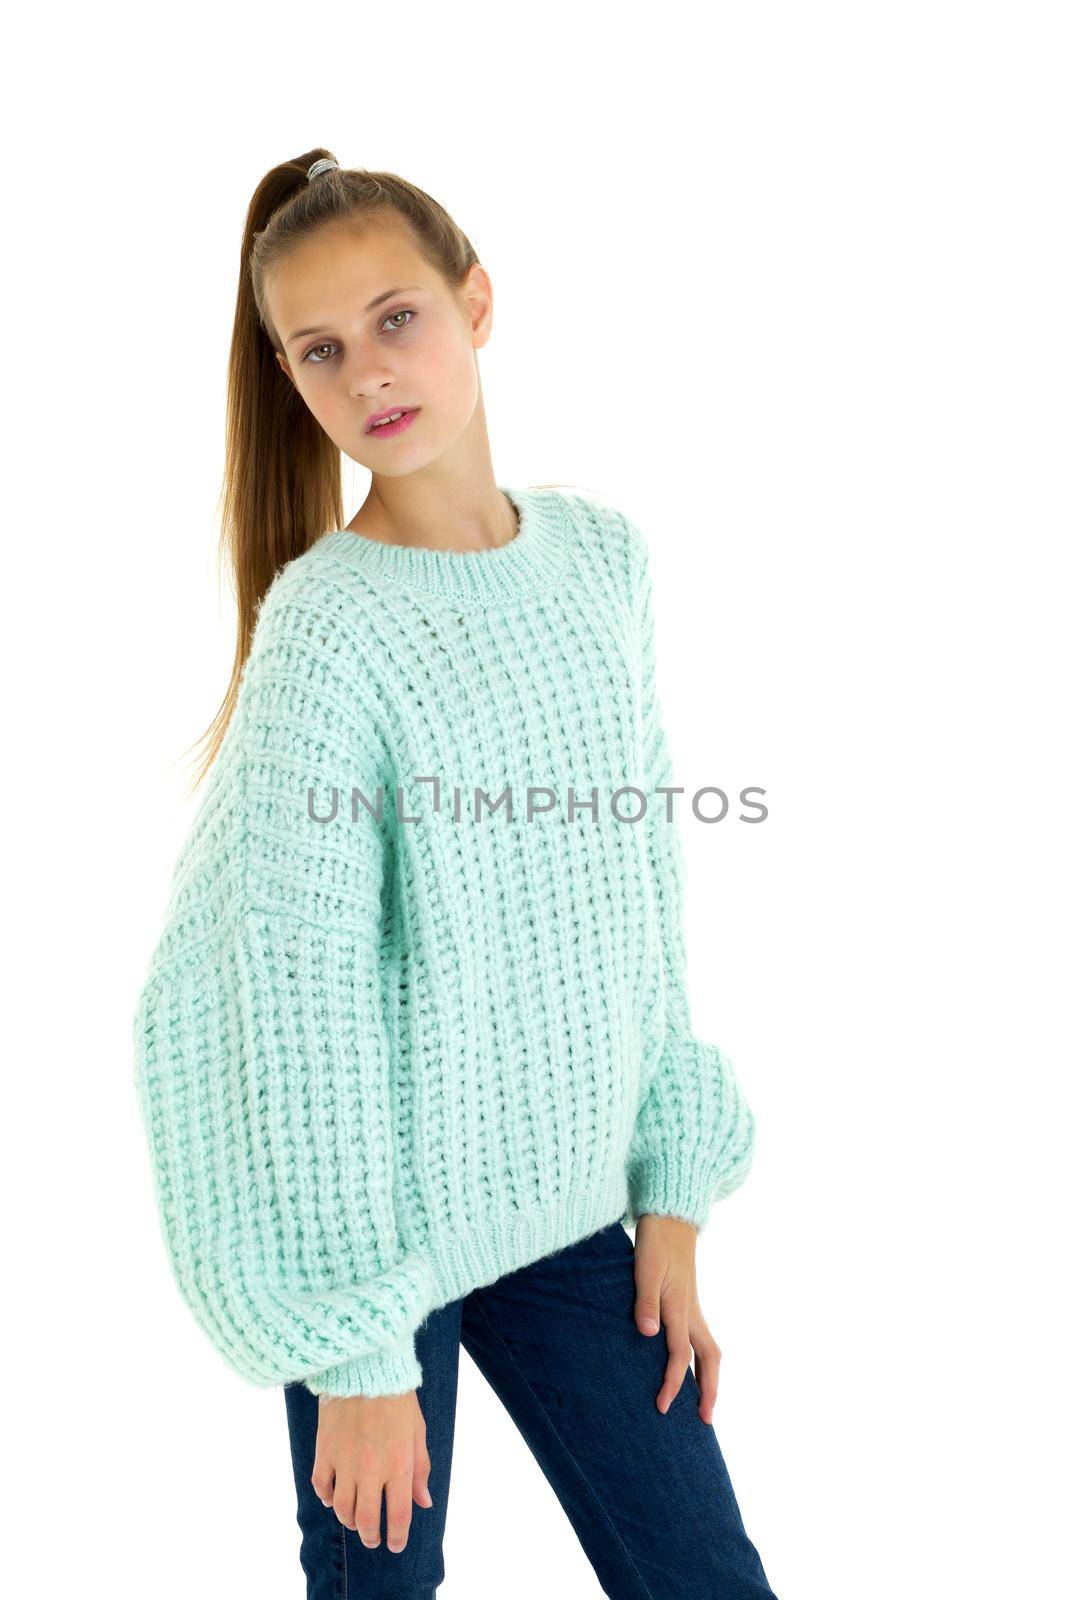 Pretty stylish teenage girl in fashionable outfit. Teenage girl with ponytail wearing warm oversized light blue sweater and jeans posing half turned to the camera on isolated white background